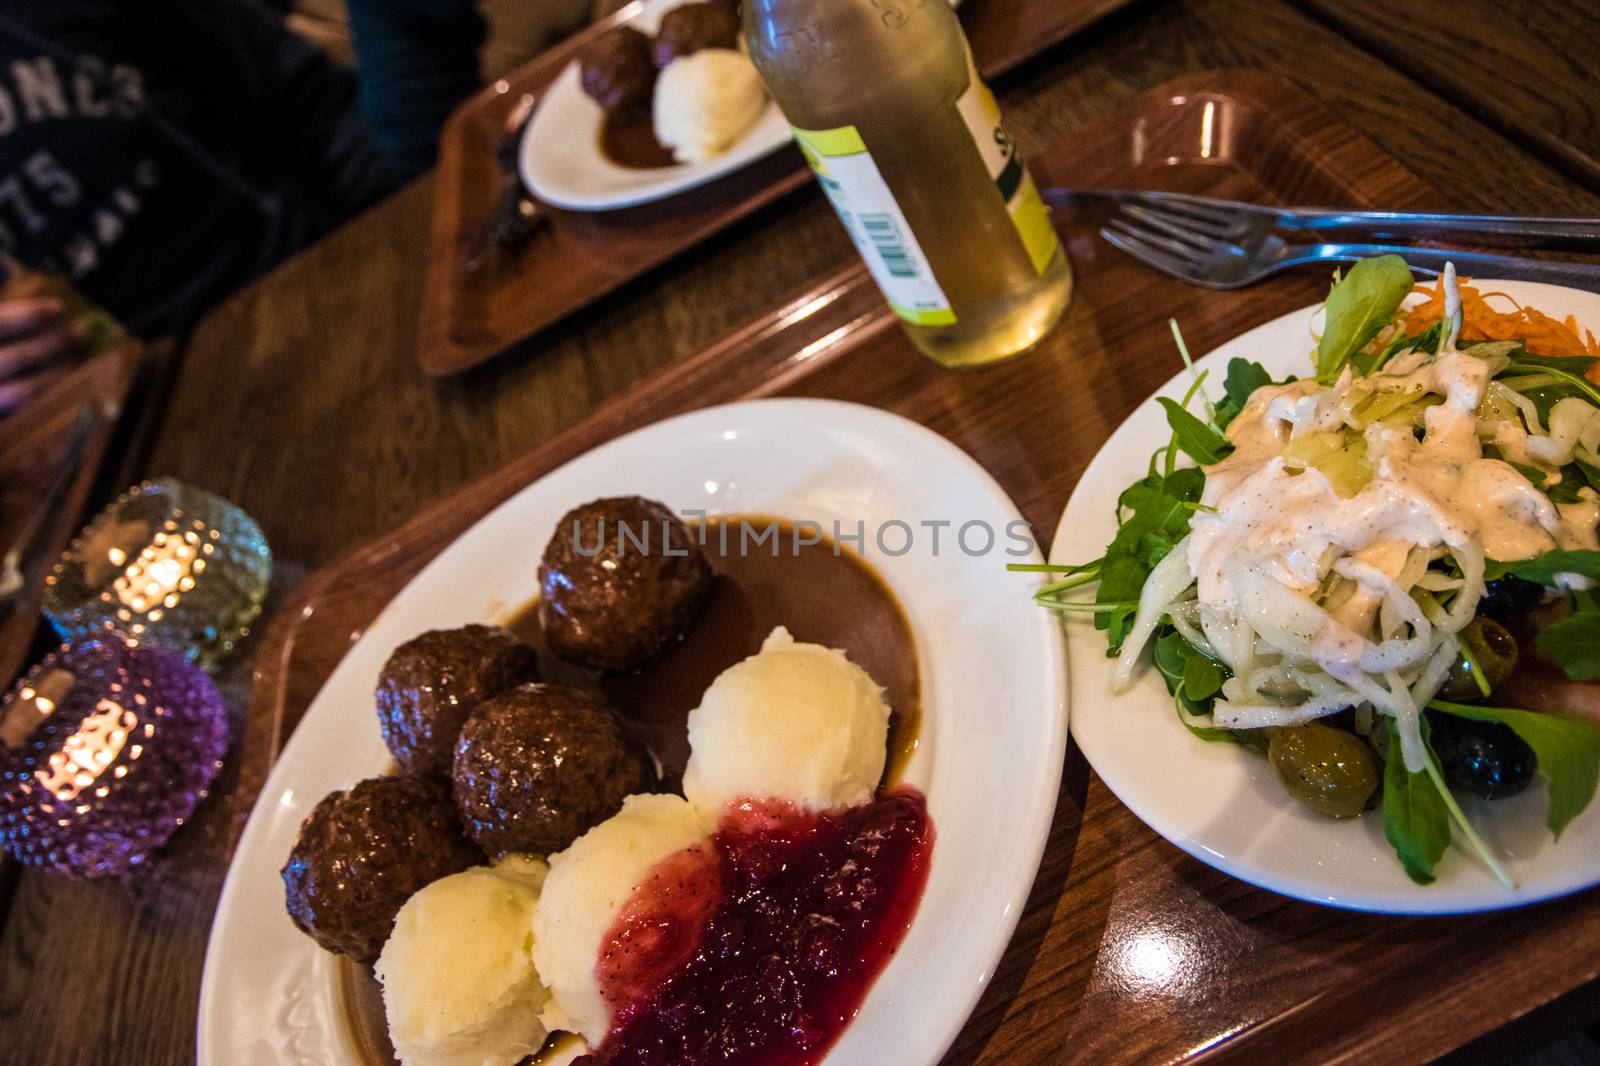 Swedish meatballs with salad, candles and lingonberry by MXW_Stock